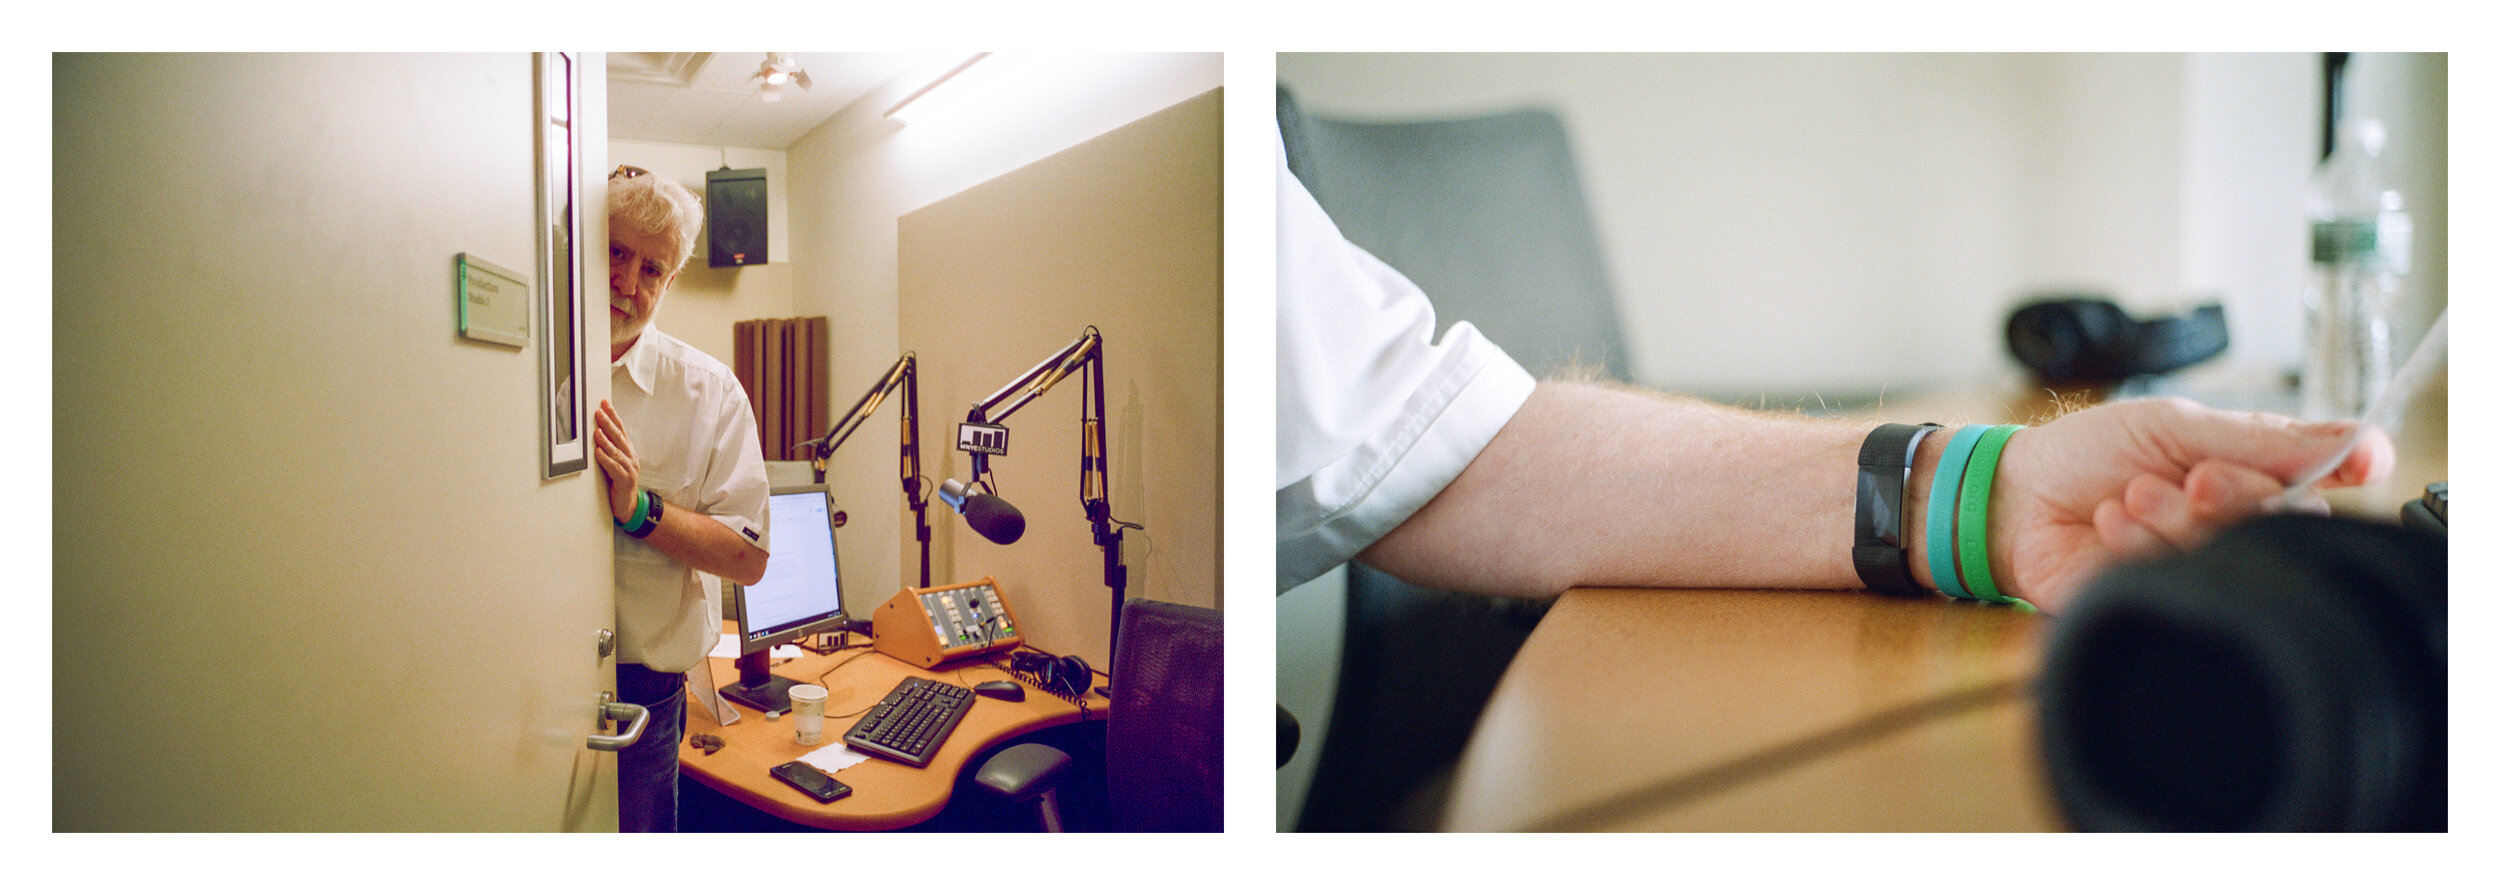  People who wear their watches on the inside of their wrists.   Bob Garfield, NPR Radio Journalist  